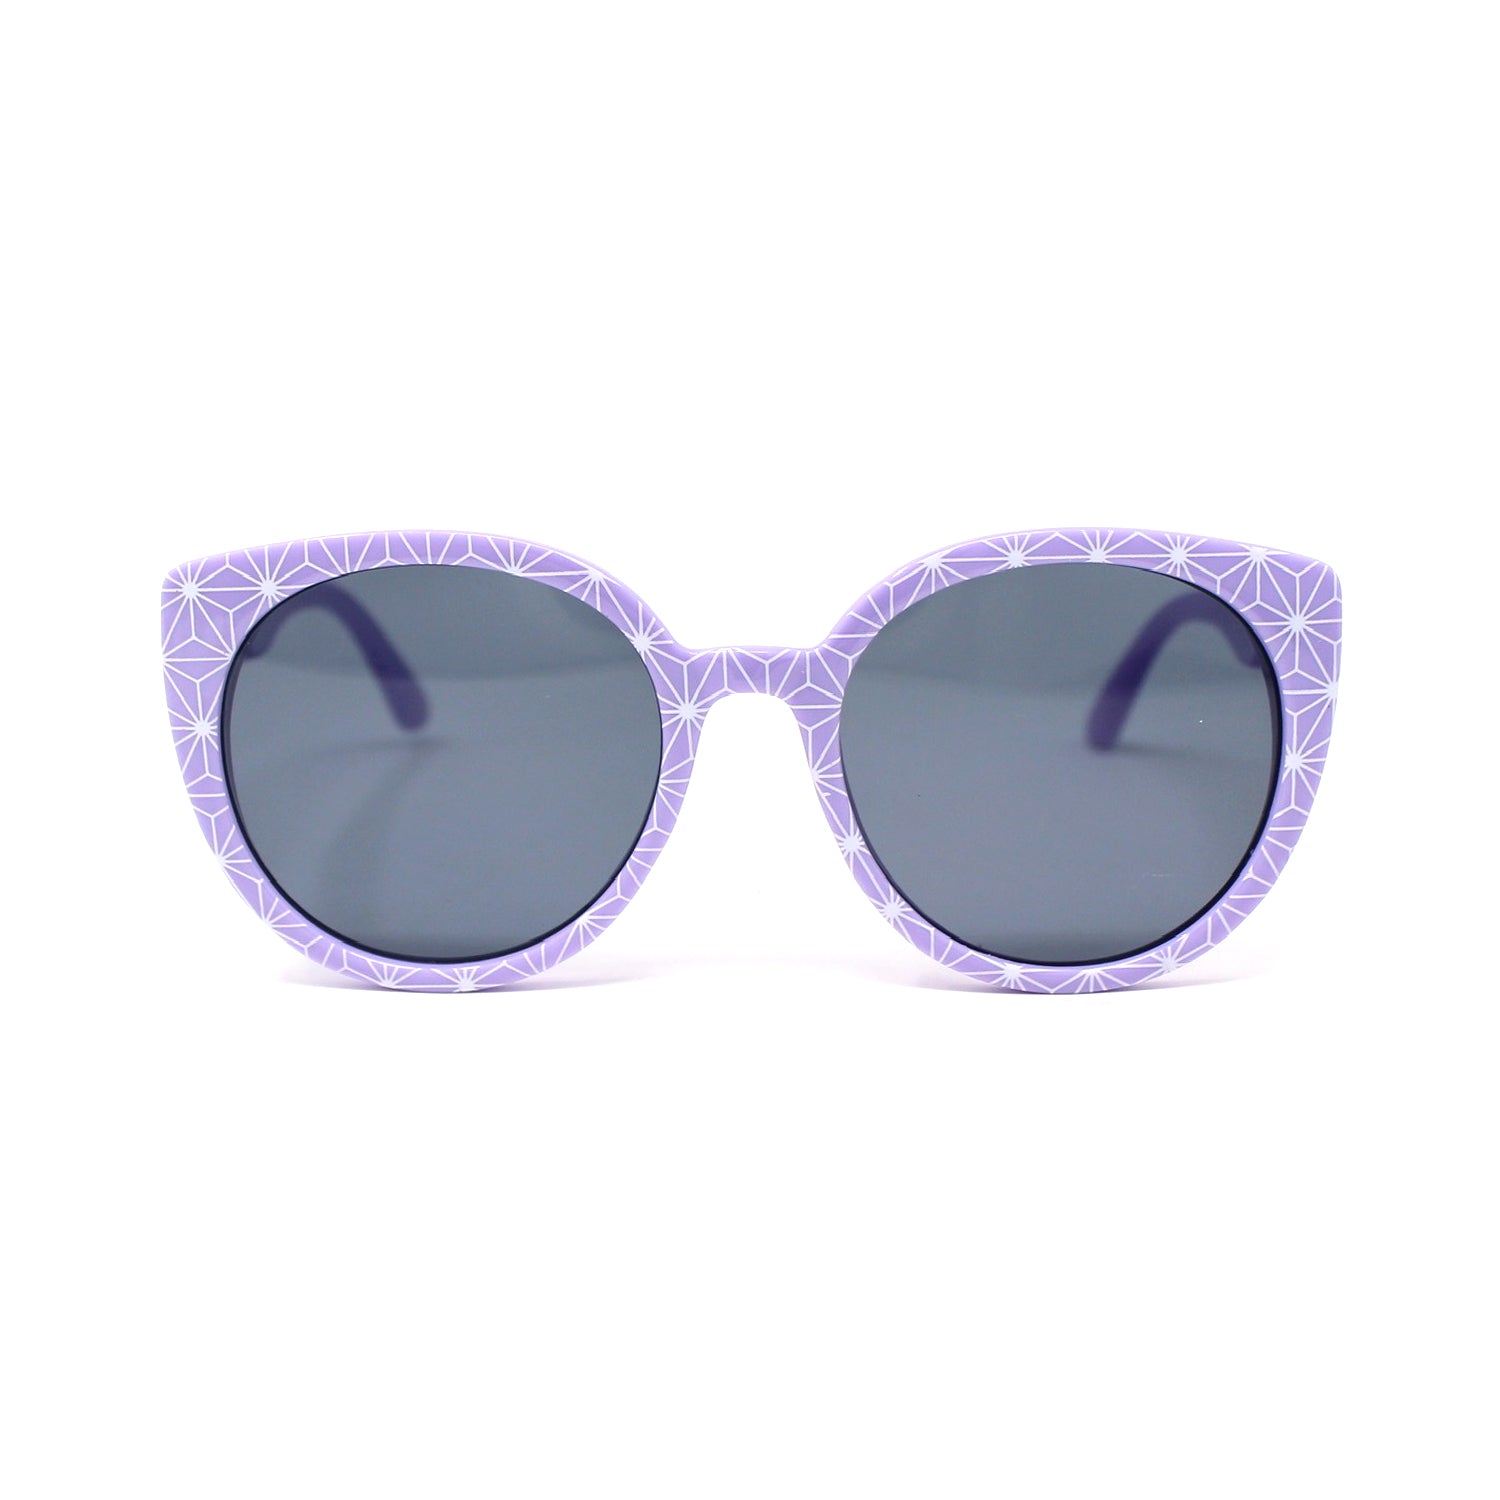 Grand and Miraculous Sunnies (lavender)